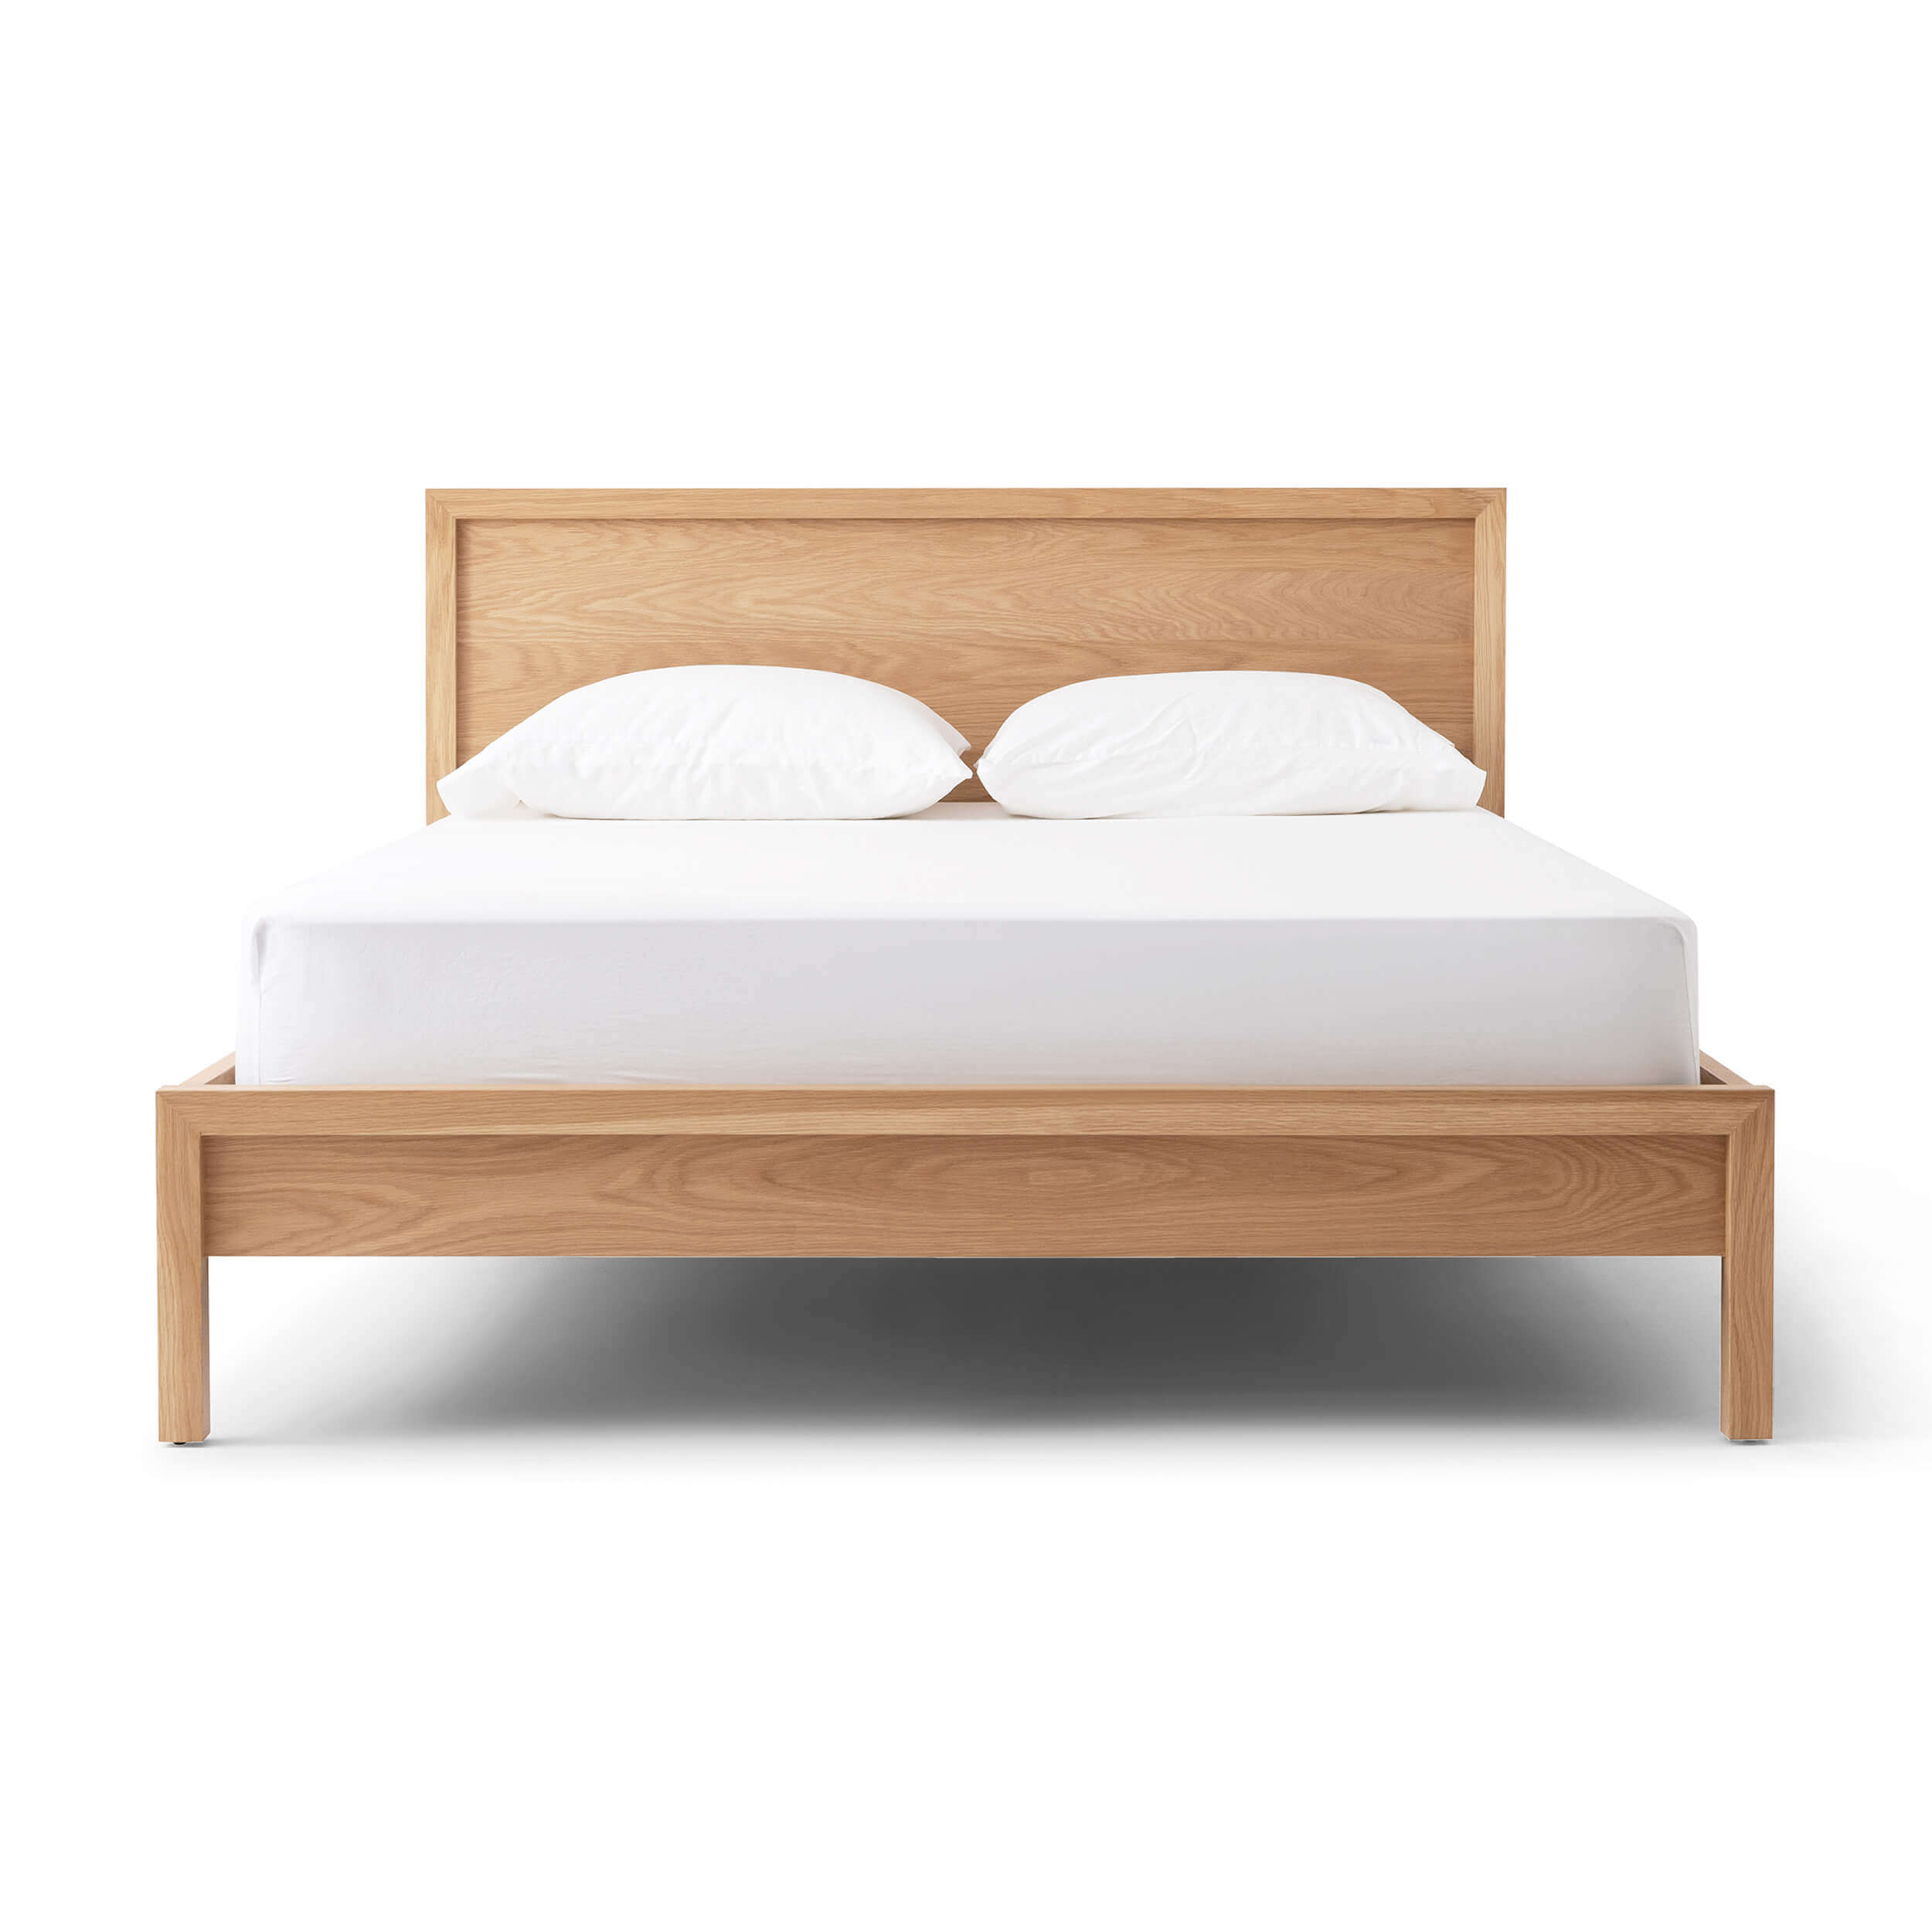 King Queen Bed Frames Modern, Metal Bed Frame Vancouver Bc Canada